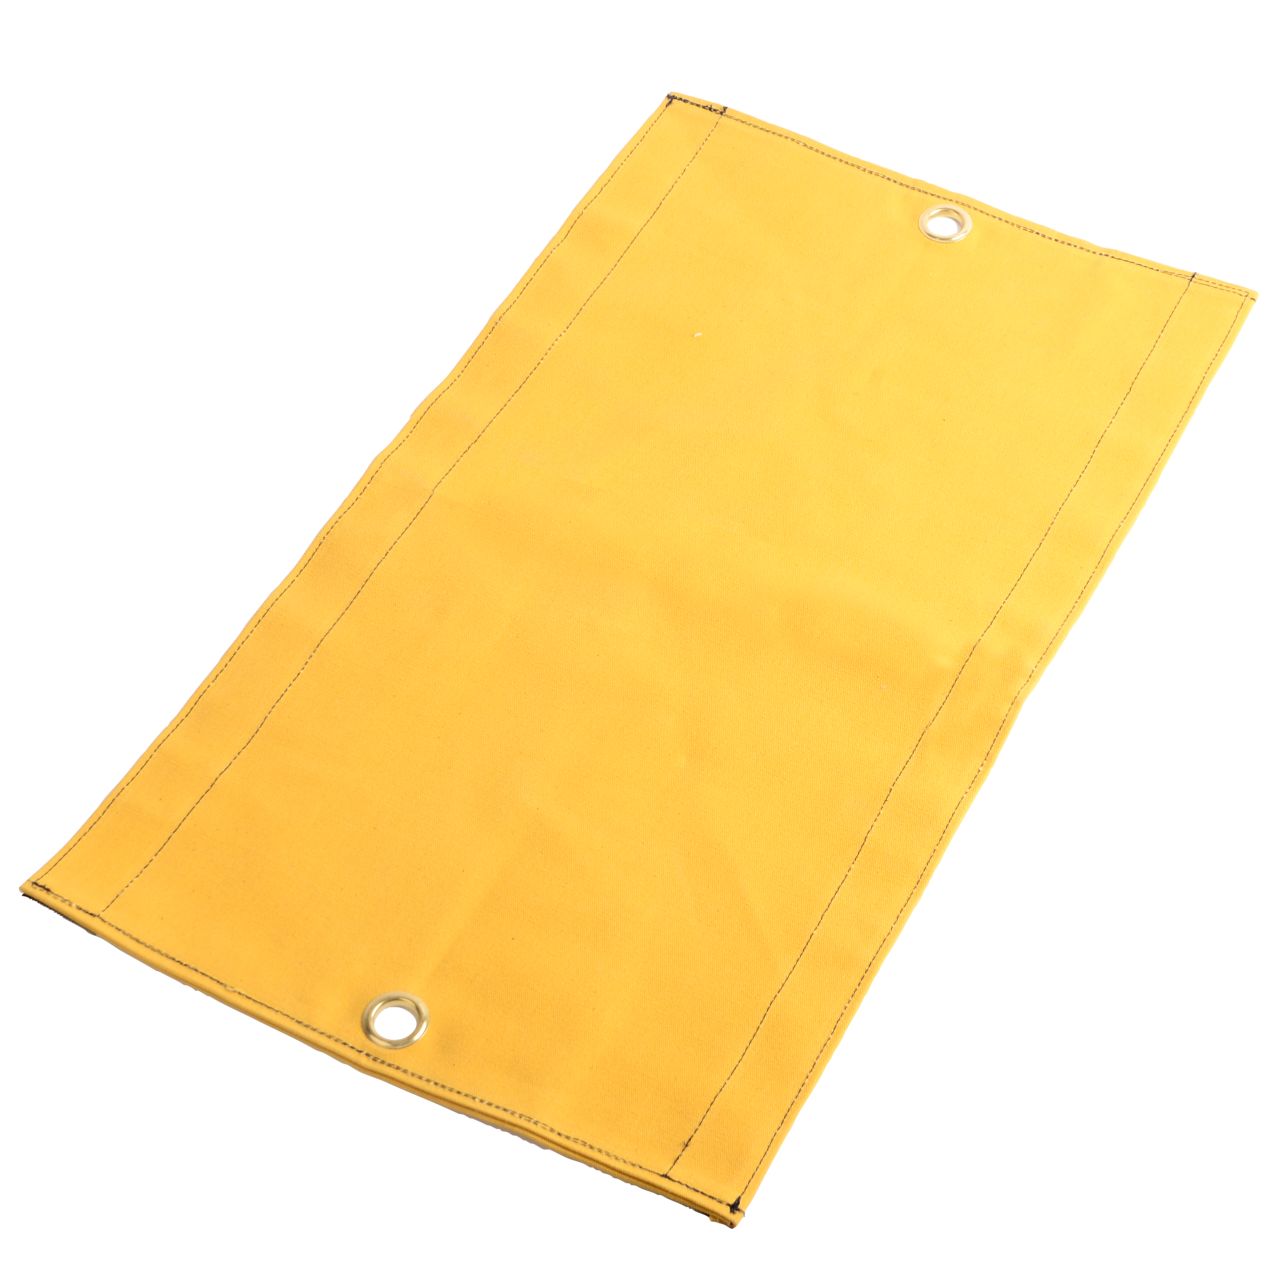 DMM ProPad+ Replacement Wearsheet